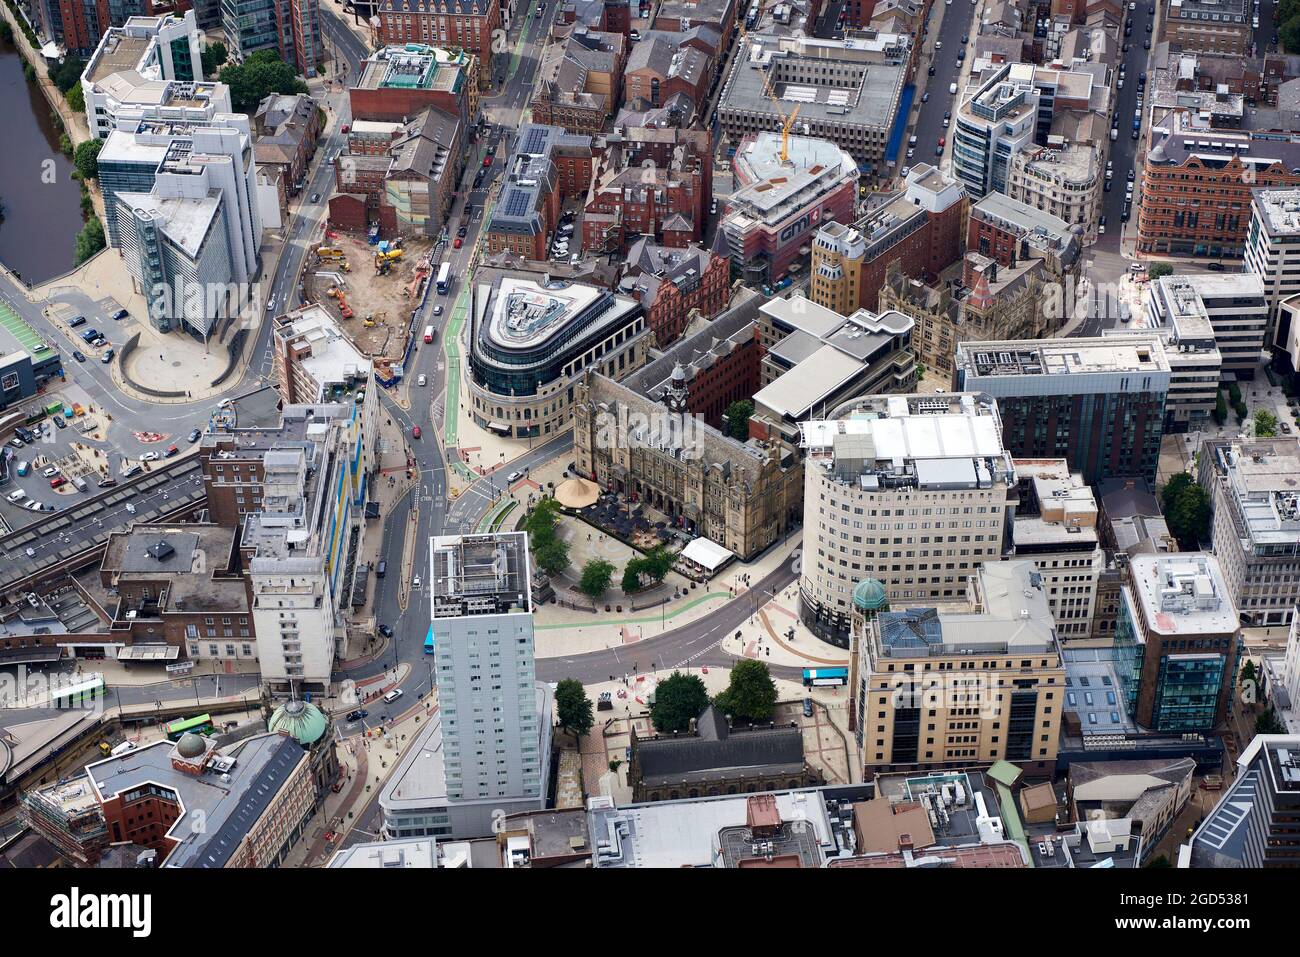 An aerial view of Leeds City Centre business district, West Yorkshire, northern England, UK Stock Photo